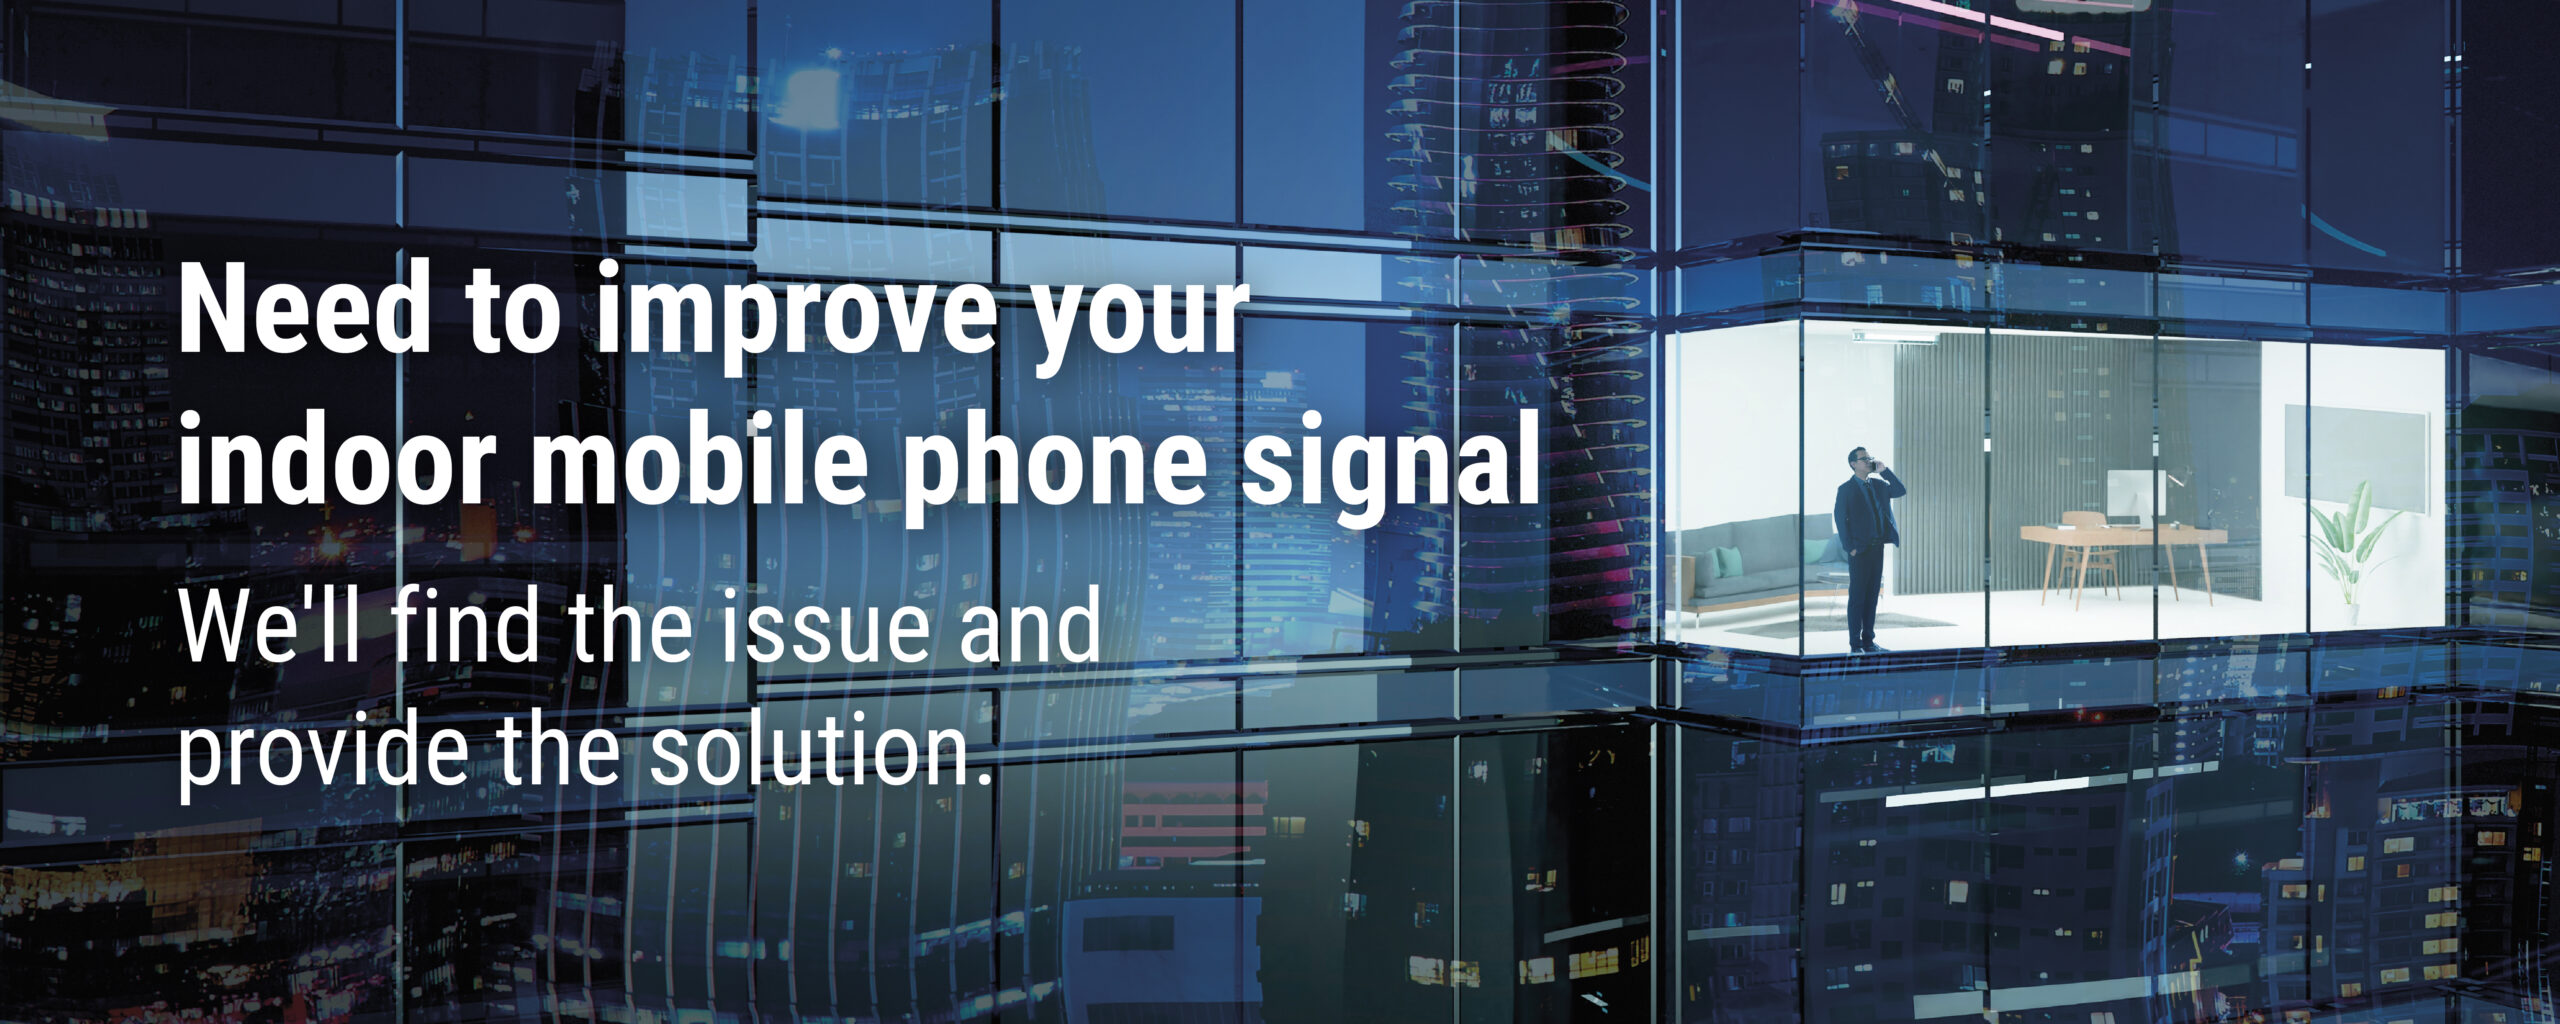 Need to improve your indoor mobile phone signal - man in high rise office building on mobile phone